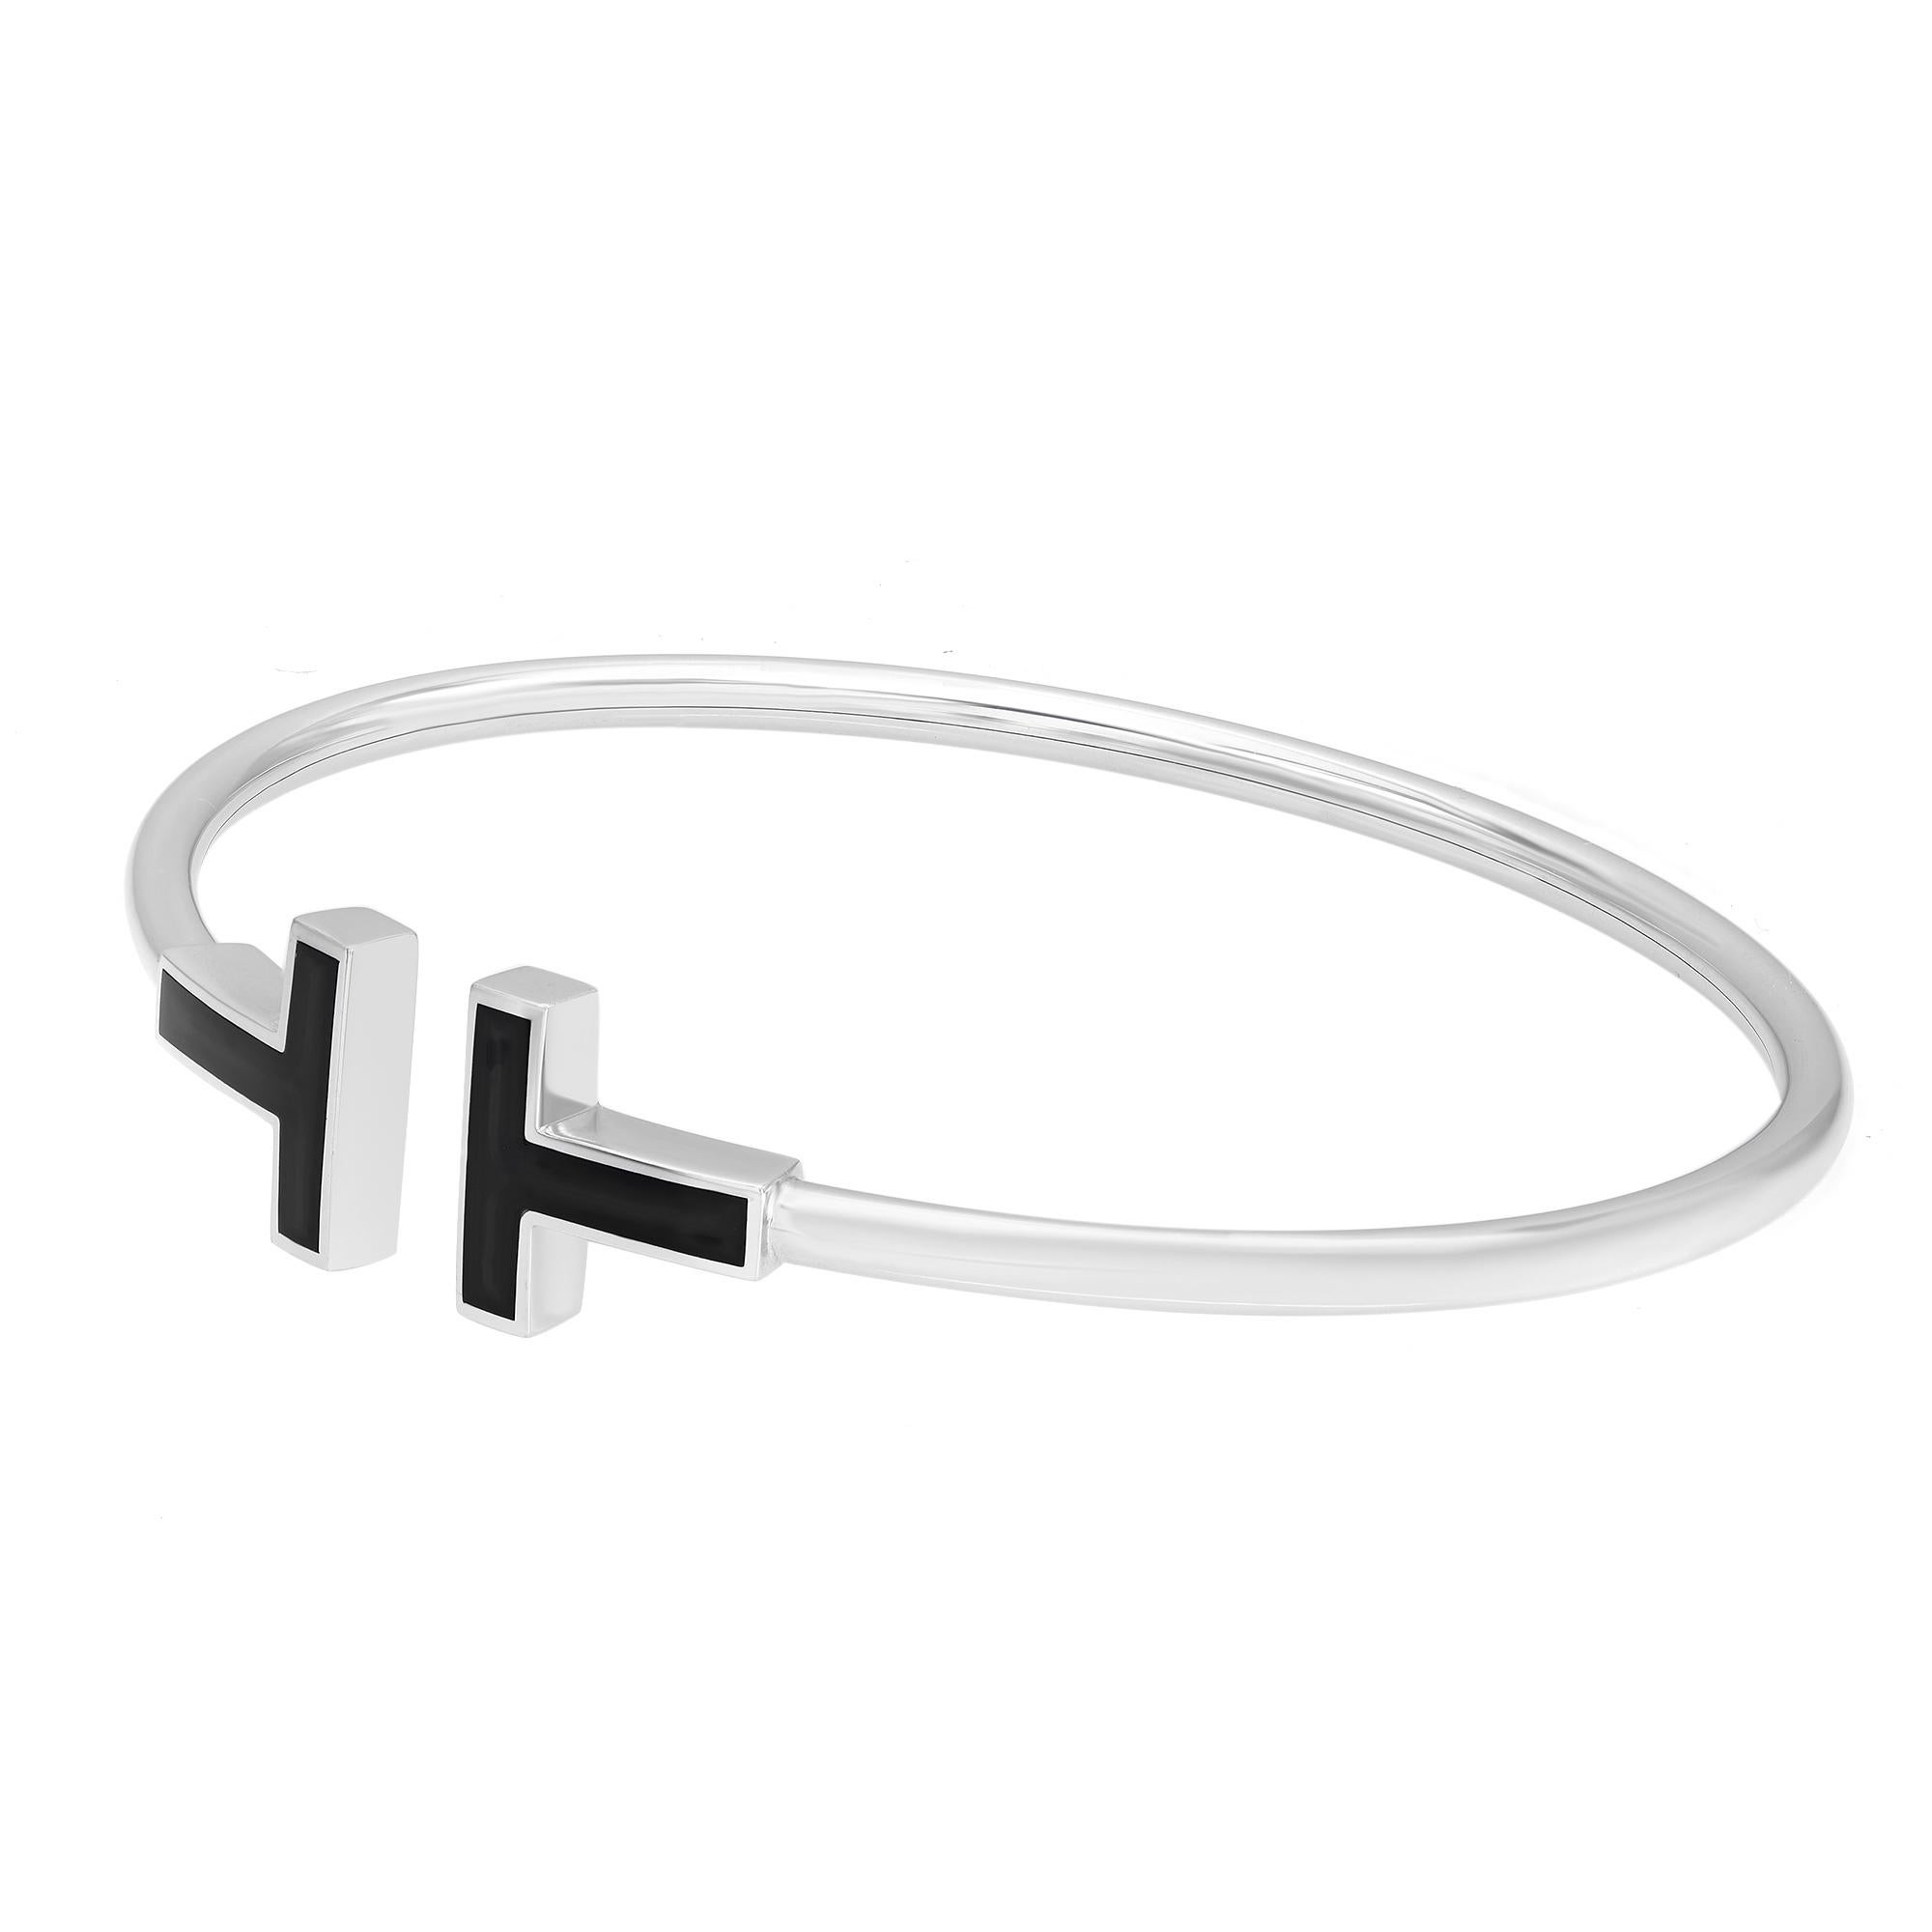 The Tiffany T collection showcases this modern wire bracelet, enhanced with black onyx creating a bold design with a smooth finish and high polish. Crafted in 18k white gold. Size Small. Fits wrists up to 5.75. Total weight: 8 grams. Wear this sleek